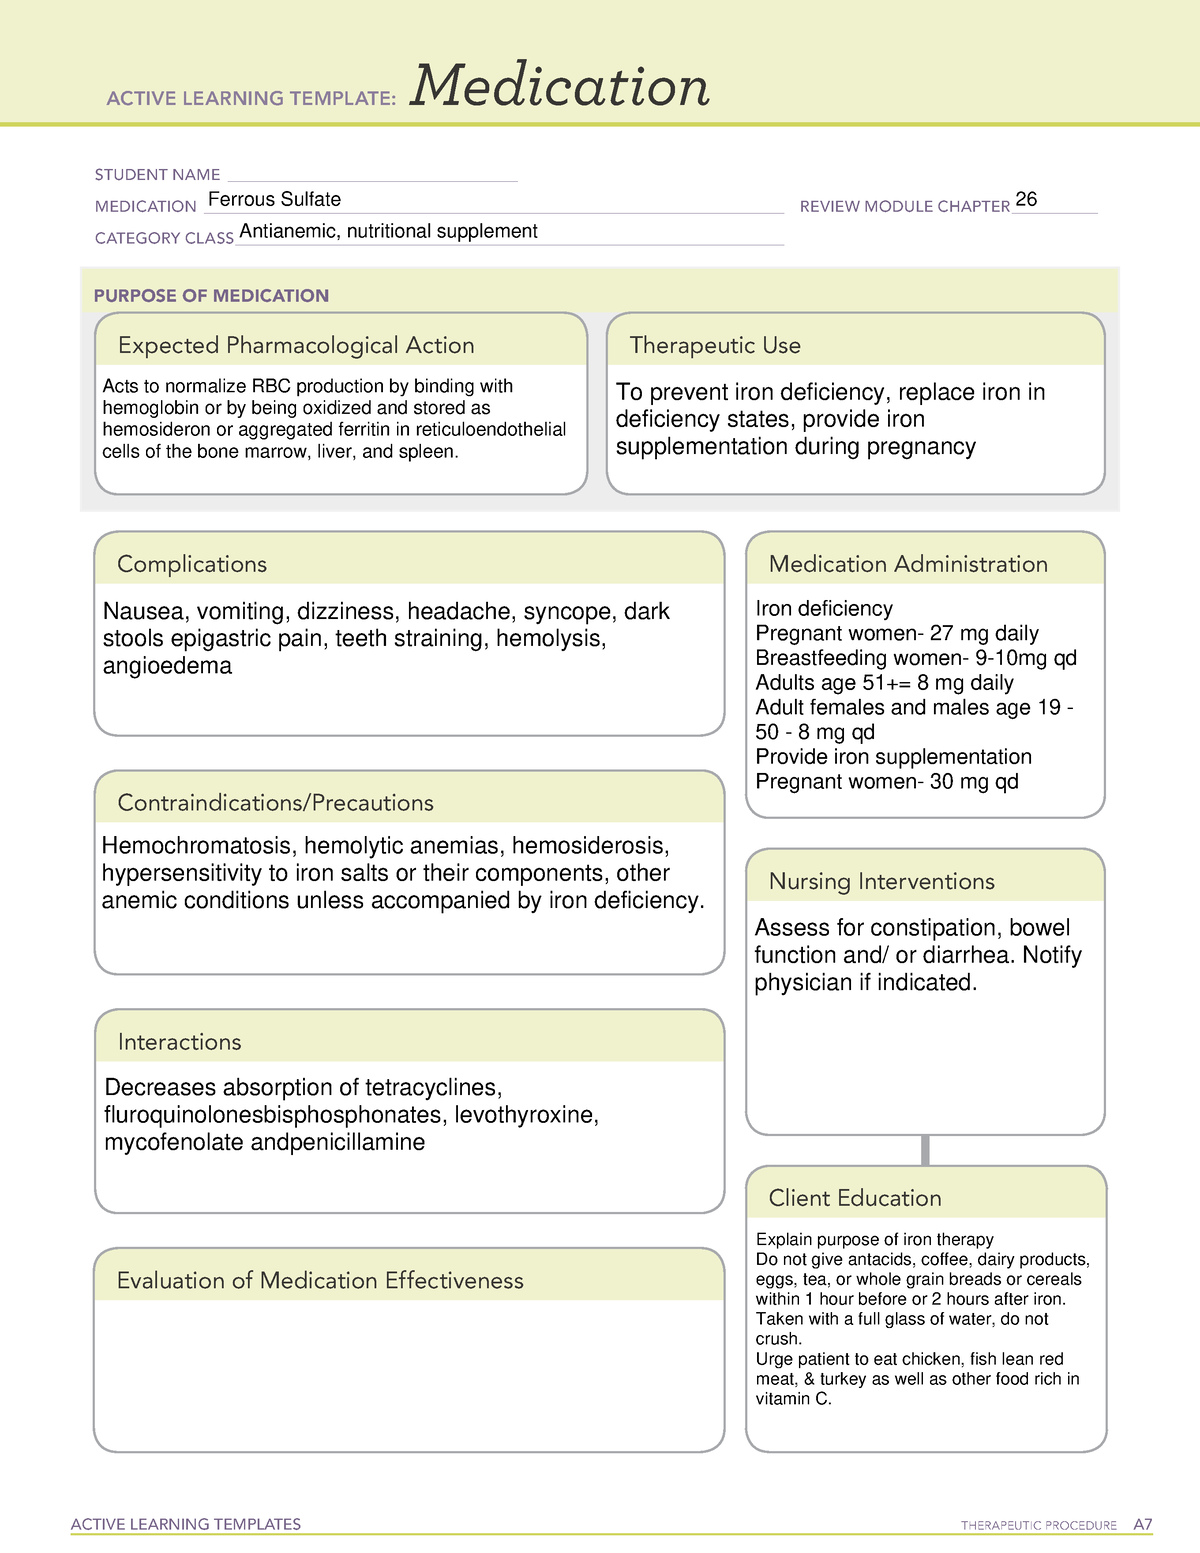 ferrous-sulfate-medication-template-active-learning-templates-therapeutic-procedure-a